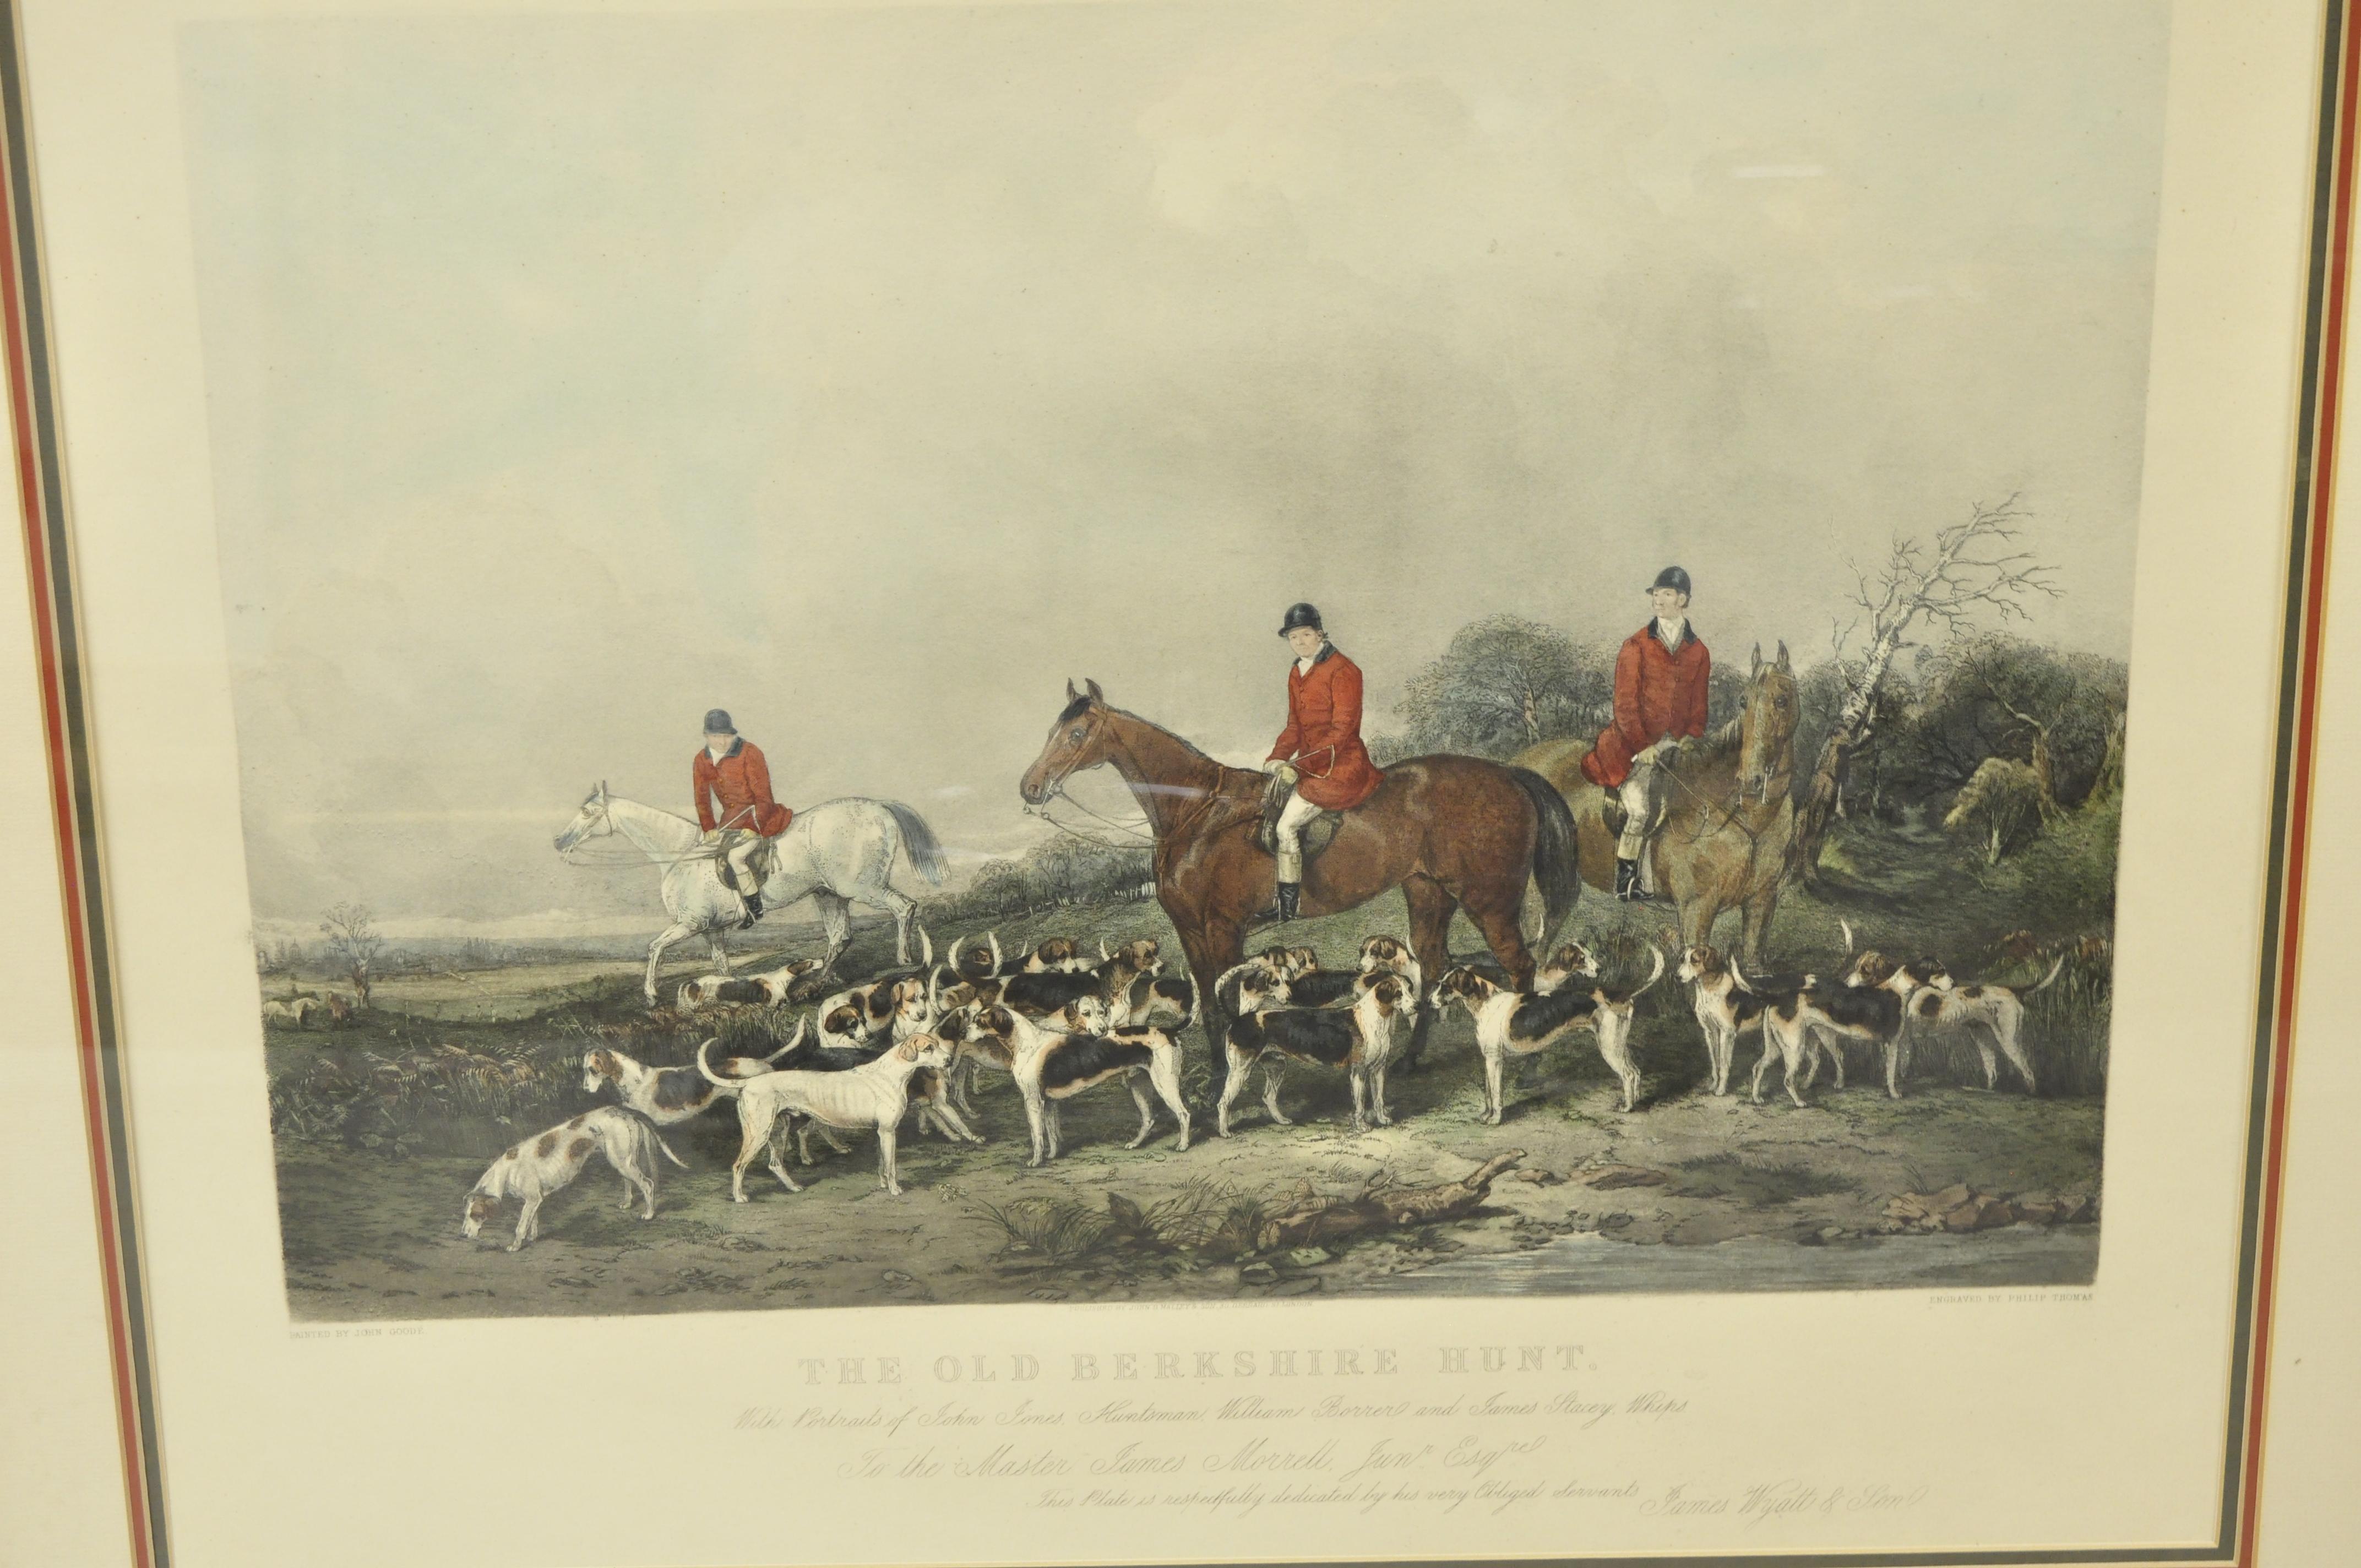 The Old Berkshire hunt framed lithograph print painting by John Goode Engraved Philip Thomas. Item features distressed gold finish wooden frame, glass front. Lithograph print believed to be early 1900s. Measurements: 31.5